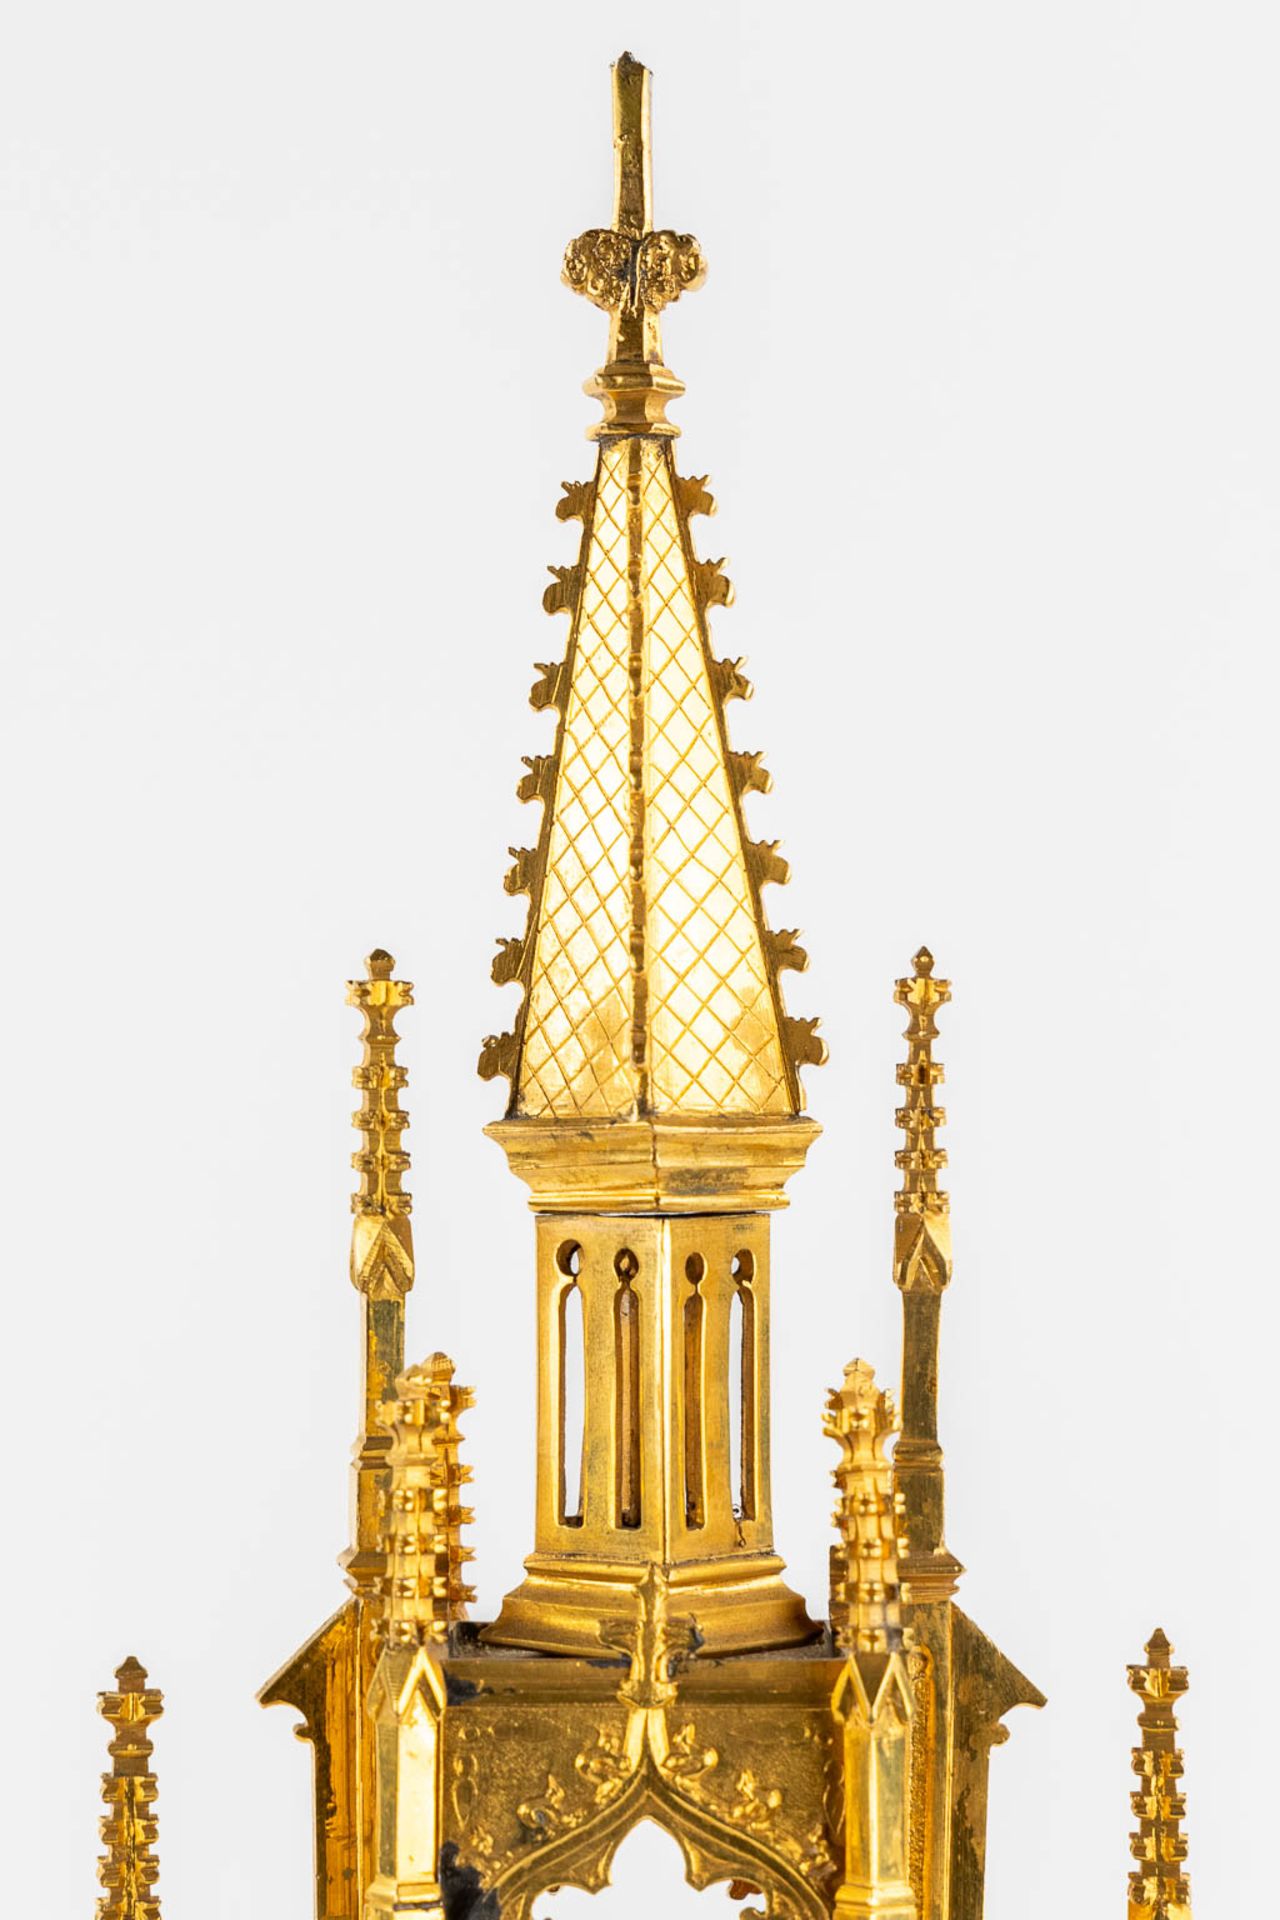 A Tower monstrance, gilt and silver plated brass, Gothic Revival. 19th C. (W:21,5 x H:58 cm) - Image 16 of 22